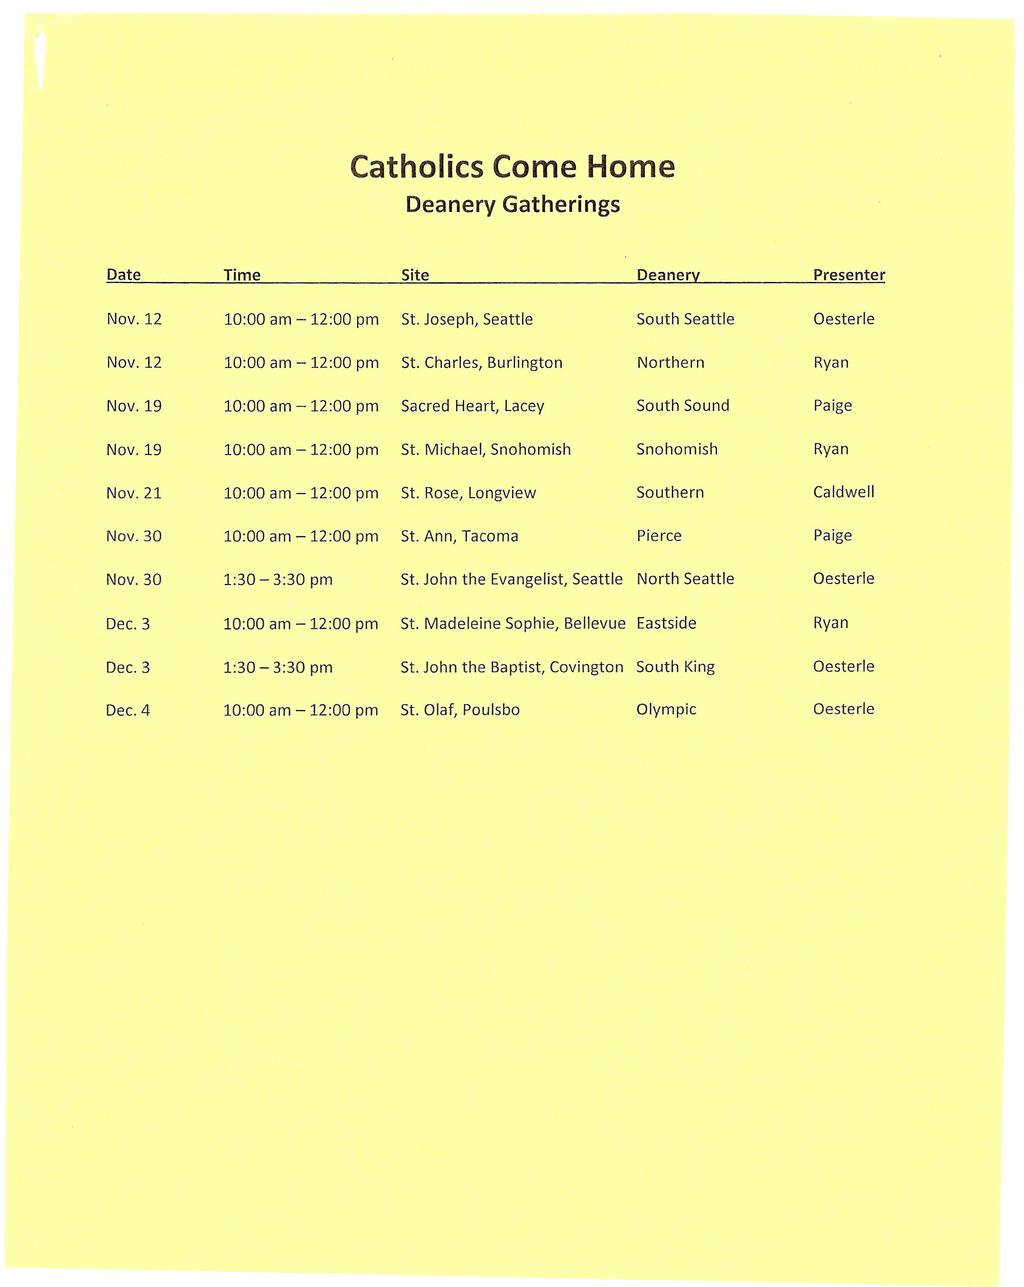 Catholics Come Home Deanery Gatherings Date Time Site Deanery Presenter Nov. 12 10:00 am -12:00 pm St. Joseph, Seattle South Seattle Oesterle Nov. 12 10:00 am -12:00 pm St. Charles, Burlington Northern Ryan Nov.